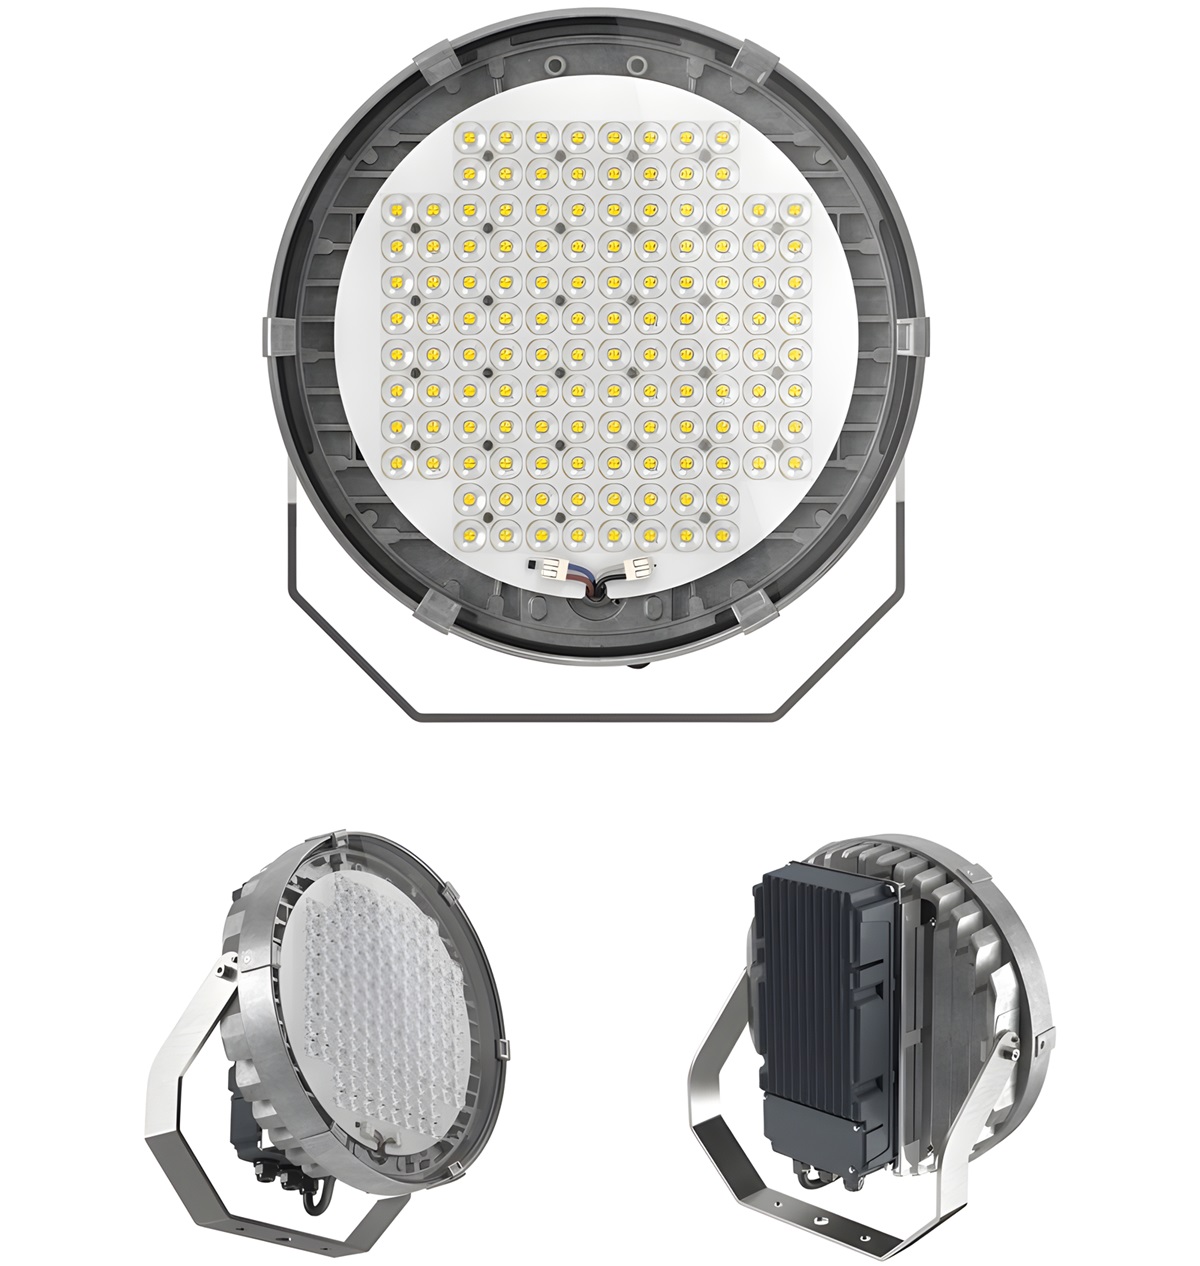 ewo Lighting Launches R1 Round for Large Area Lighting